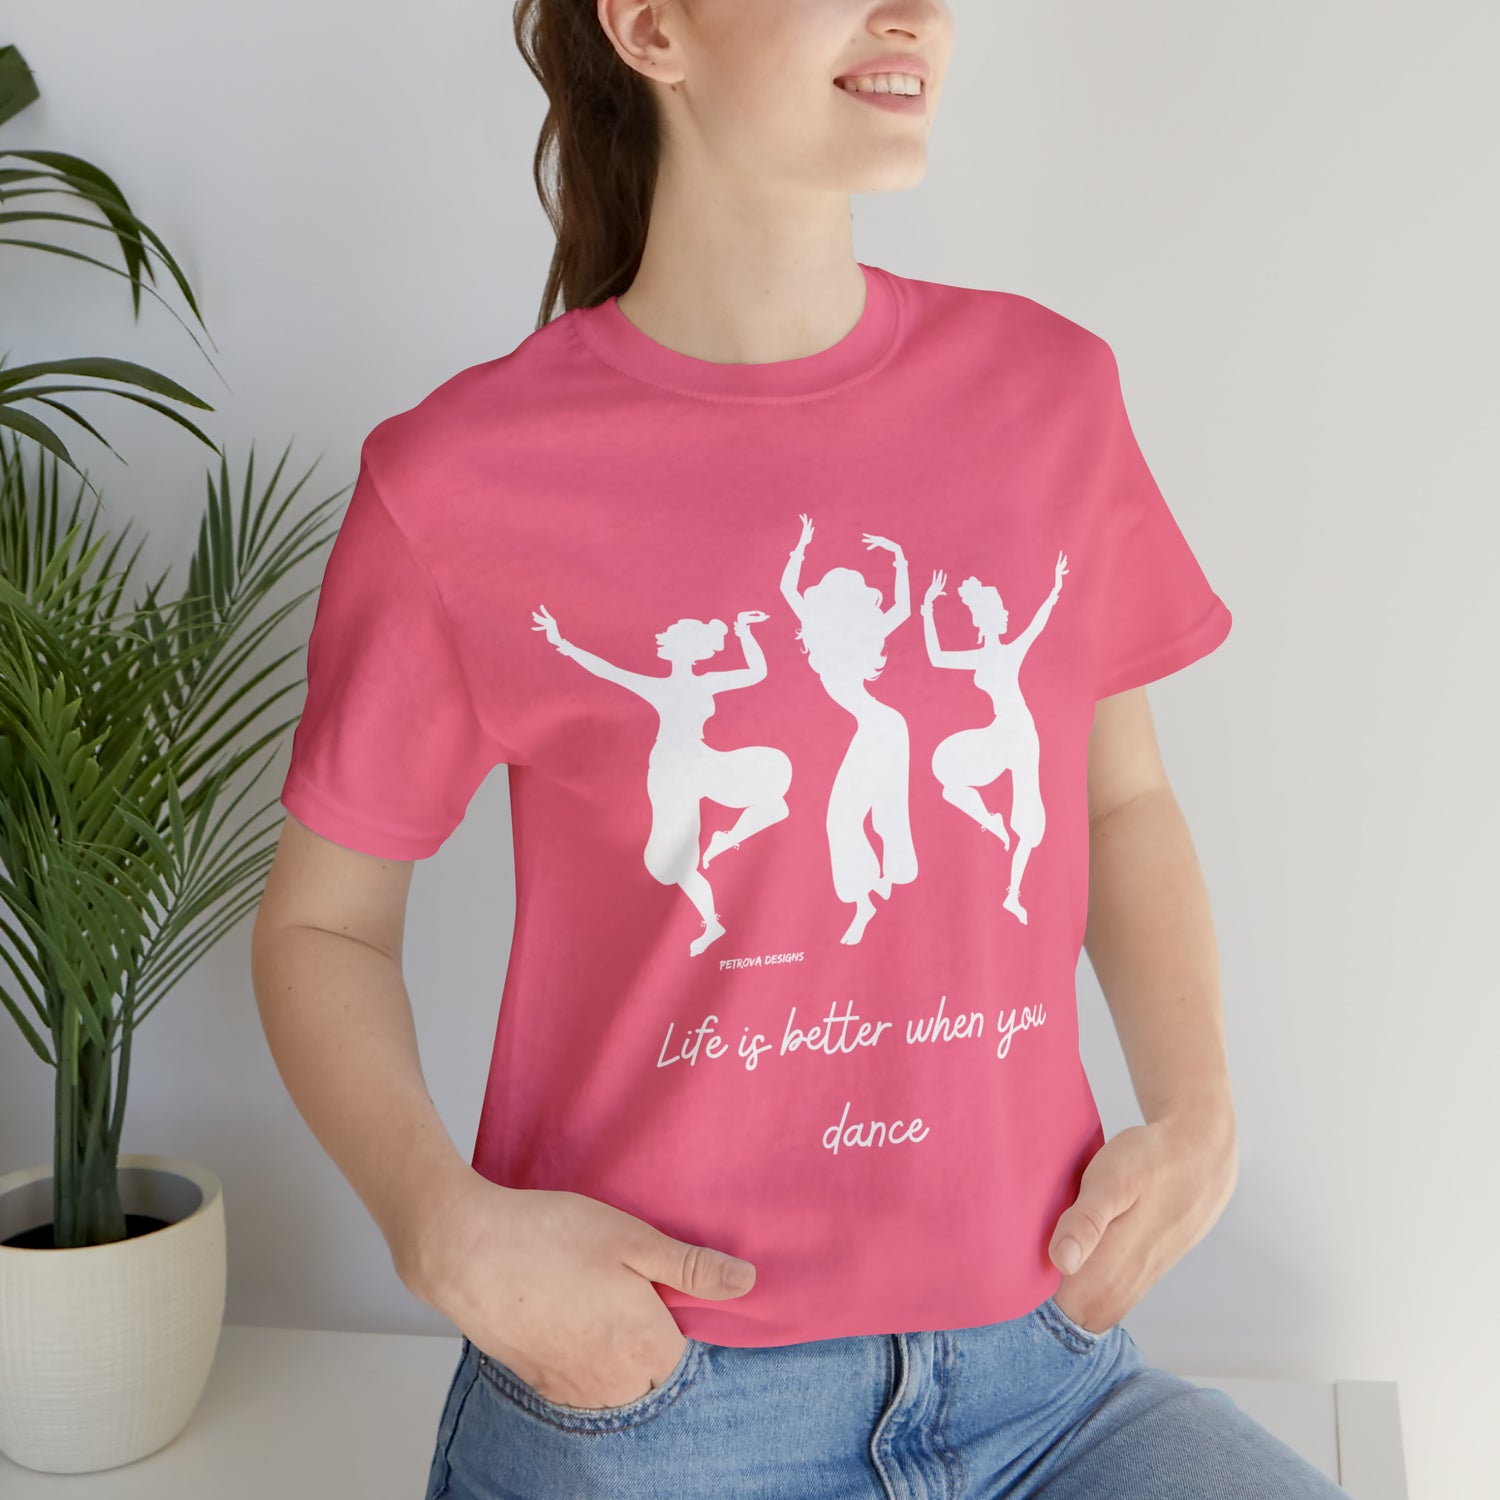 Charity Pink T-Shirt Tshirt Design Gift for Friend and Family Short Sleeved Shirt Hobby Aesthetic Petrova Designs